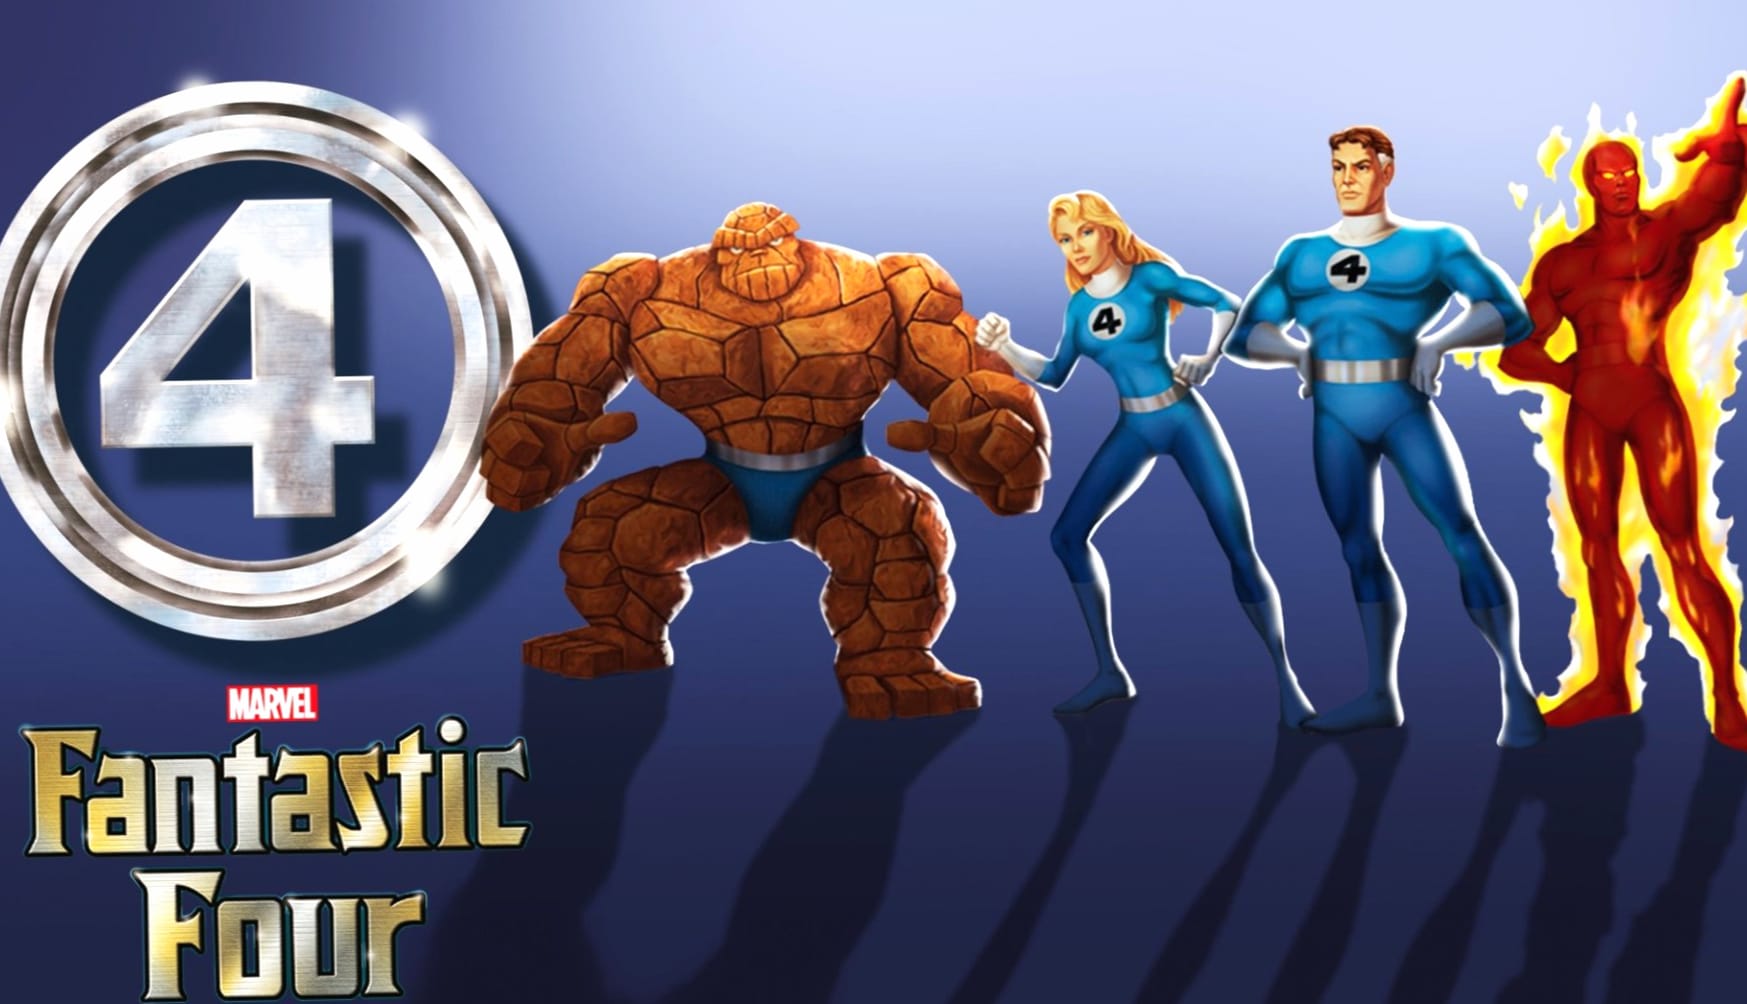 Fantastic Four (1994) wallpapers HD quality